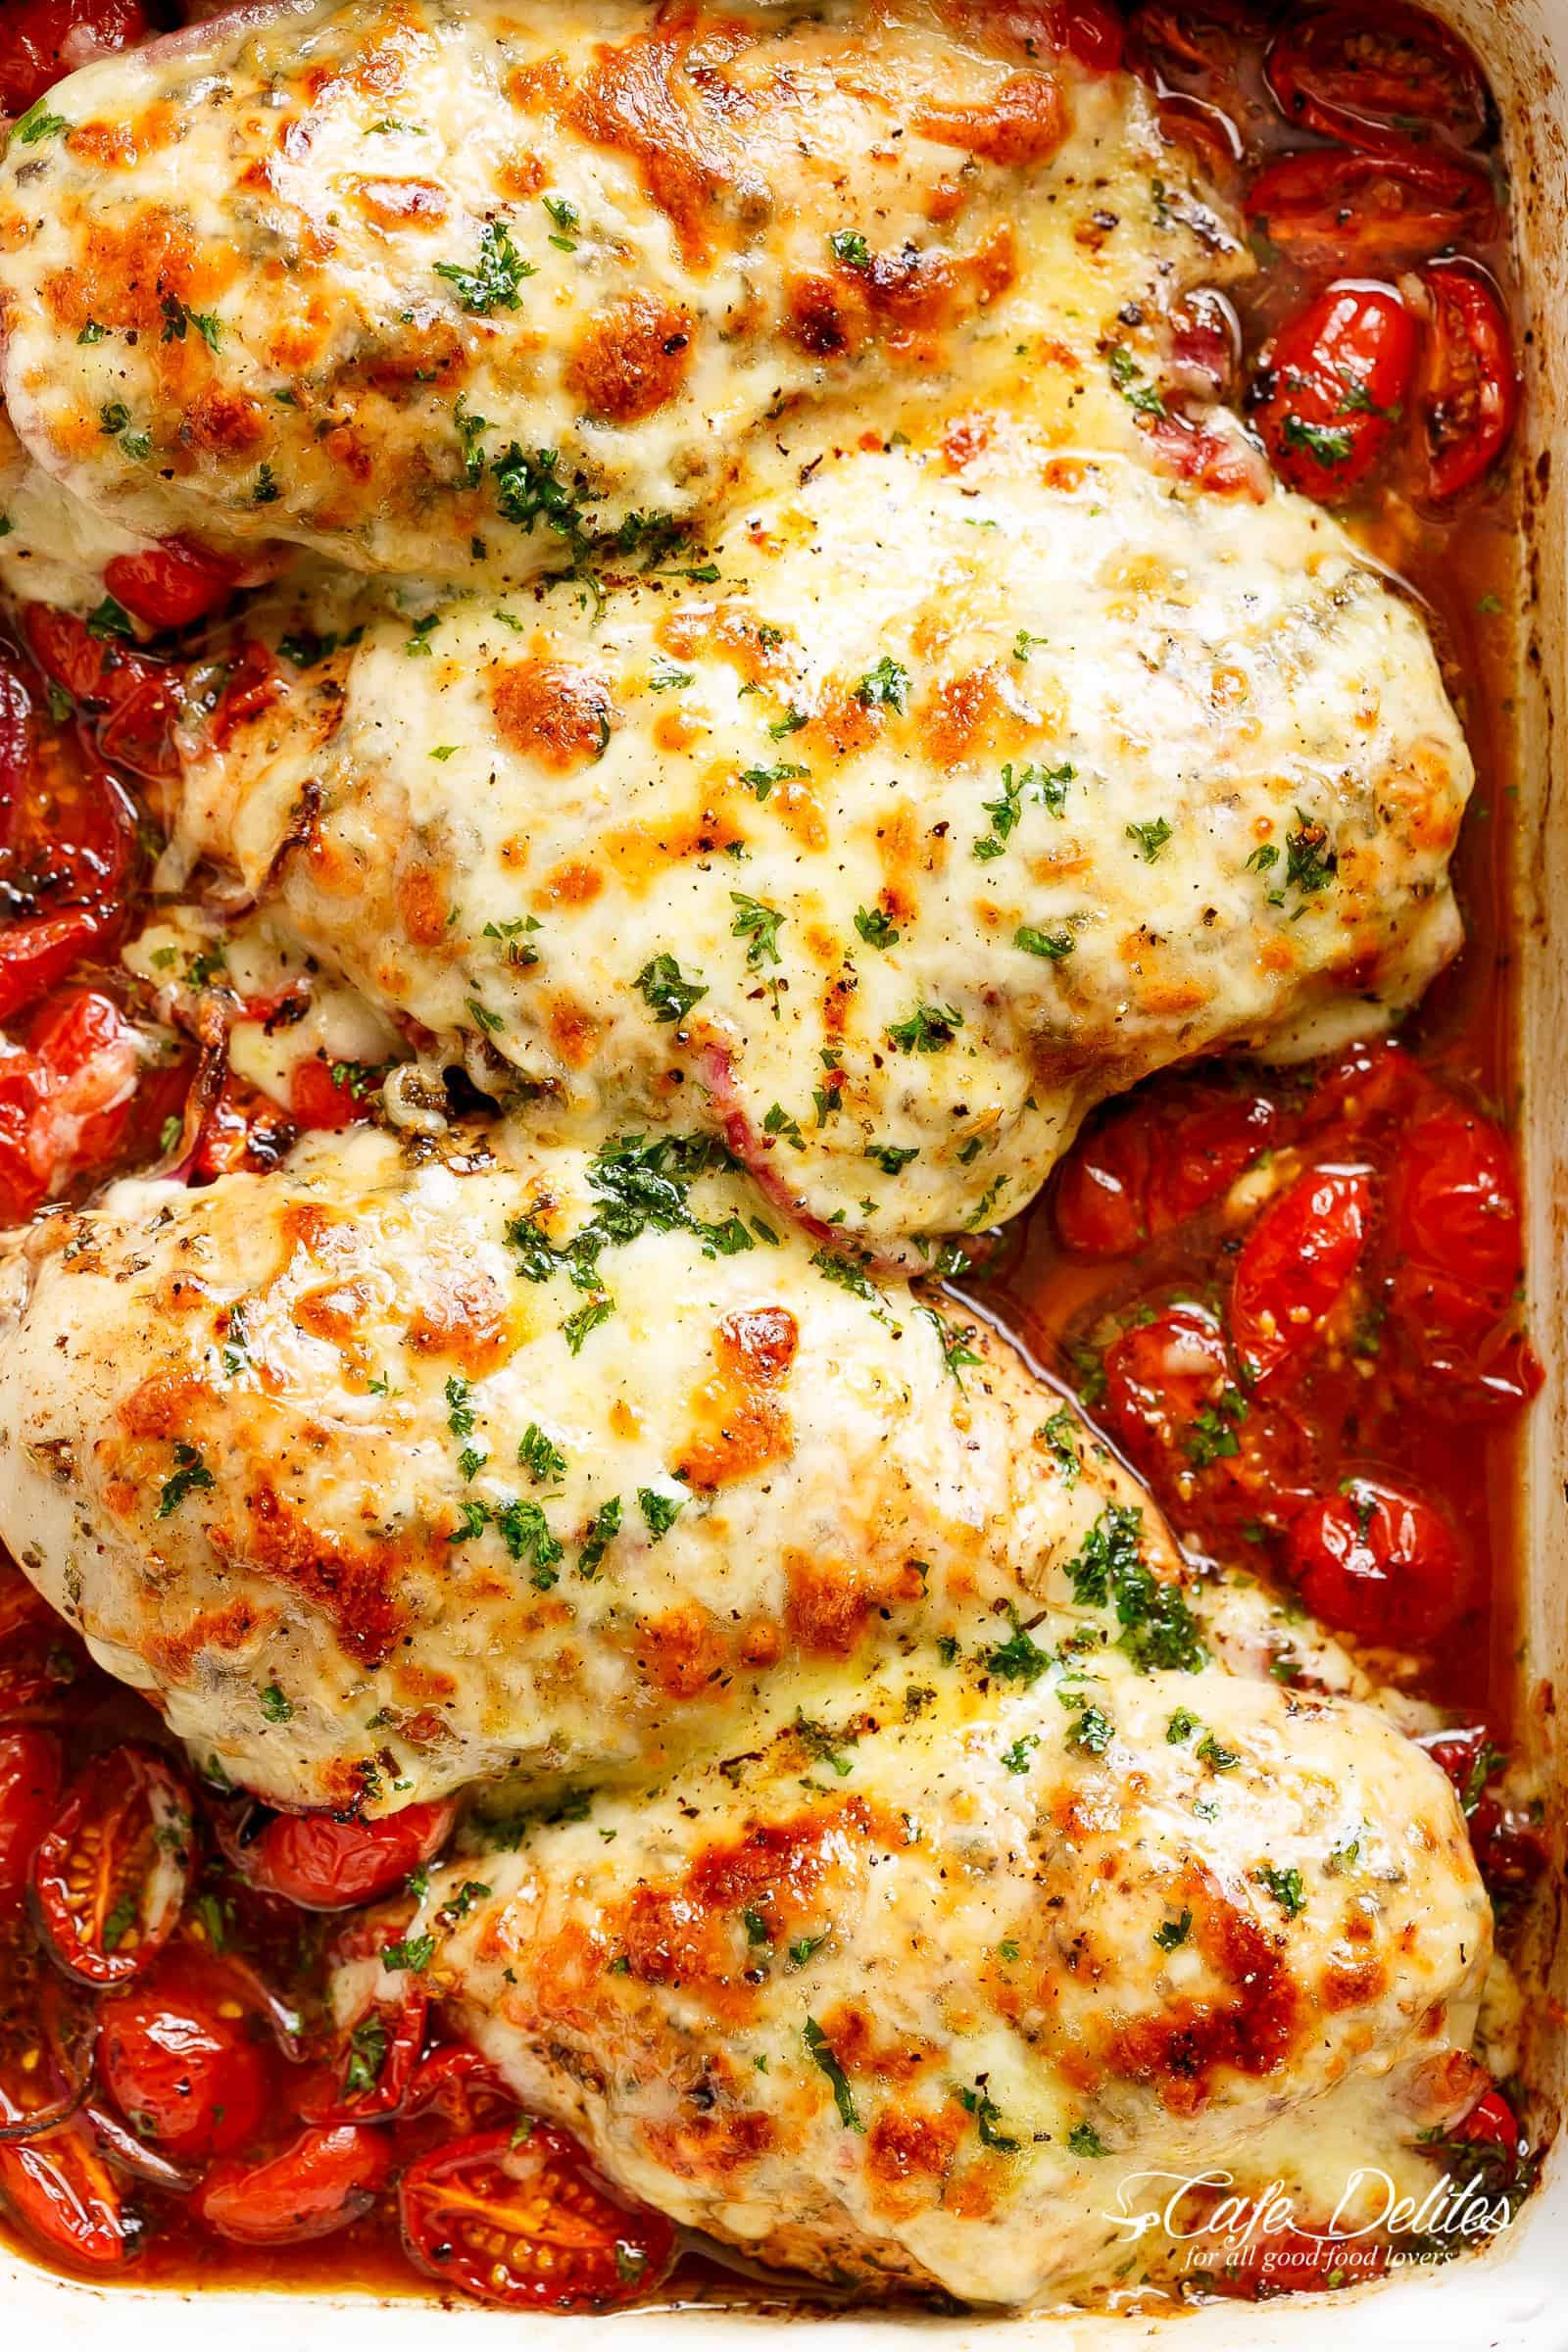 Baked Chicken with Cheese Fresh Balsamic Baked Chicken Breast with Mozzarella Cheese